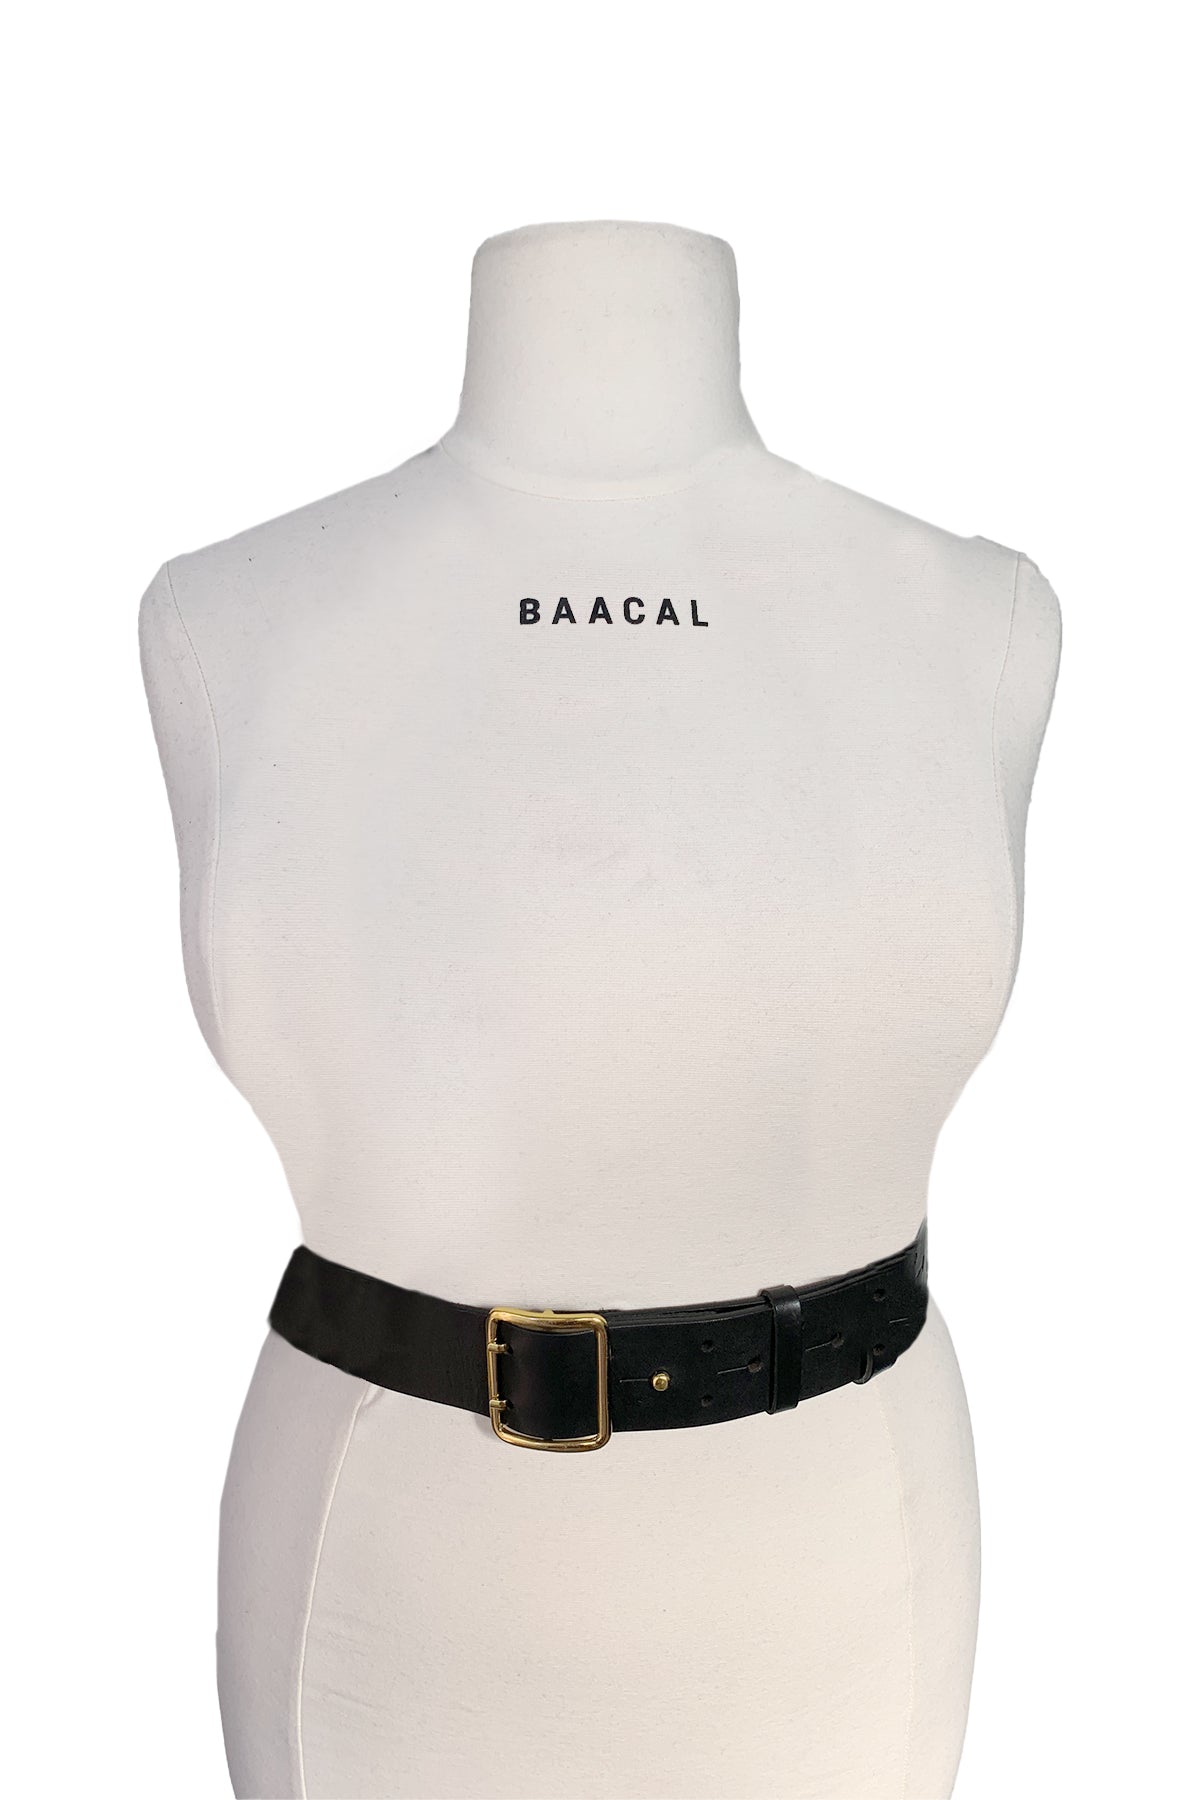 Made of genuine leather, this is the easiest wardrobe update piece! Add the harness strap to give this classic black belt a different look. Layer over dresses, tops, and suits for an edgy and modern look. Made for "The True Majority" sizes 10-22 by BAACAL Cynthia Vincent.  Made in the USA